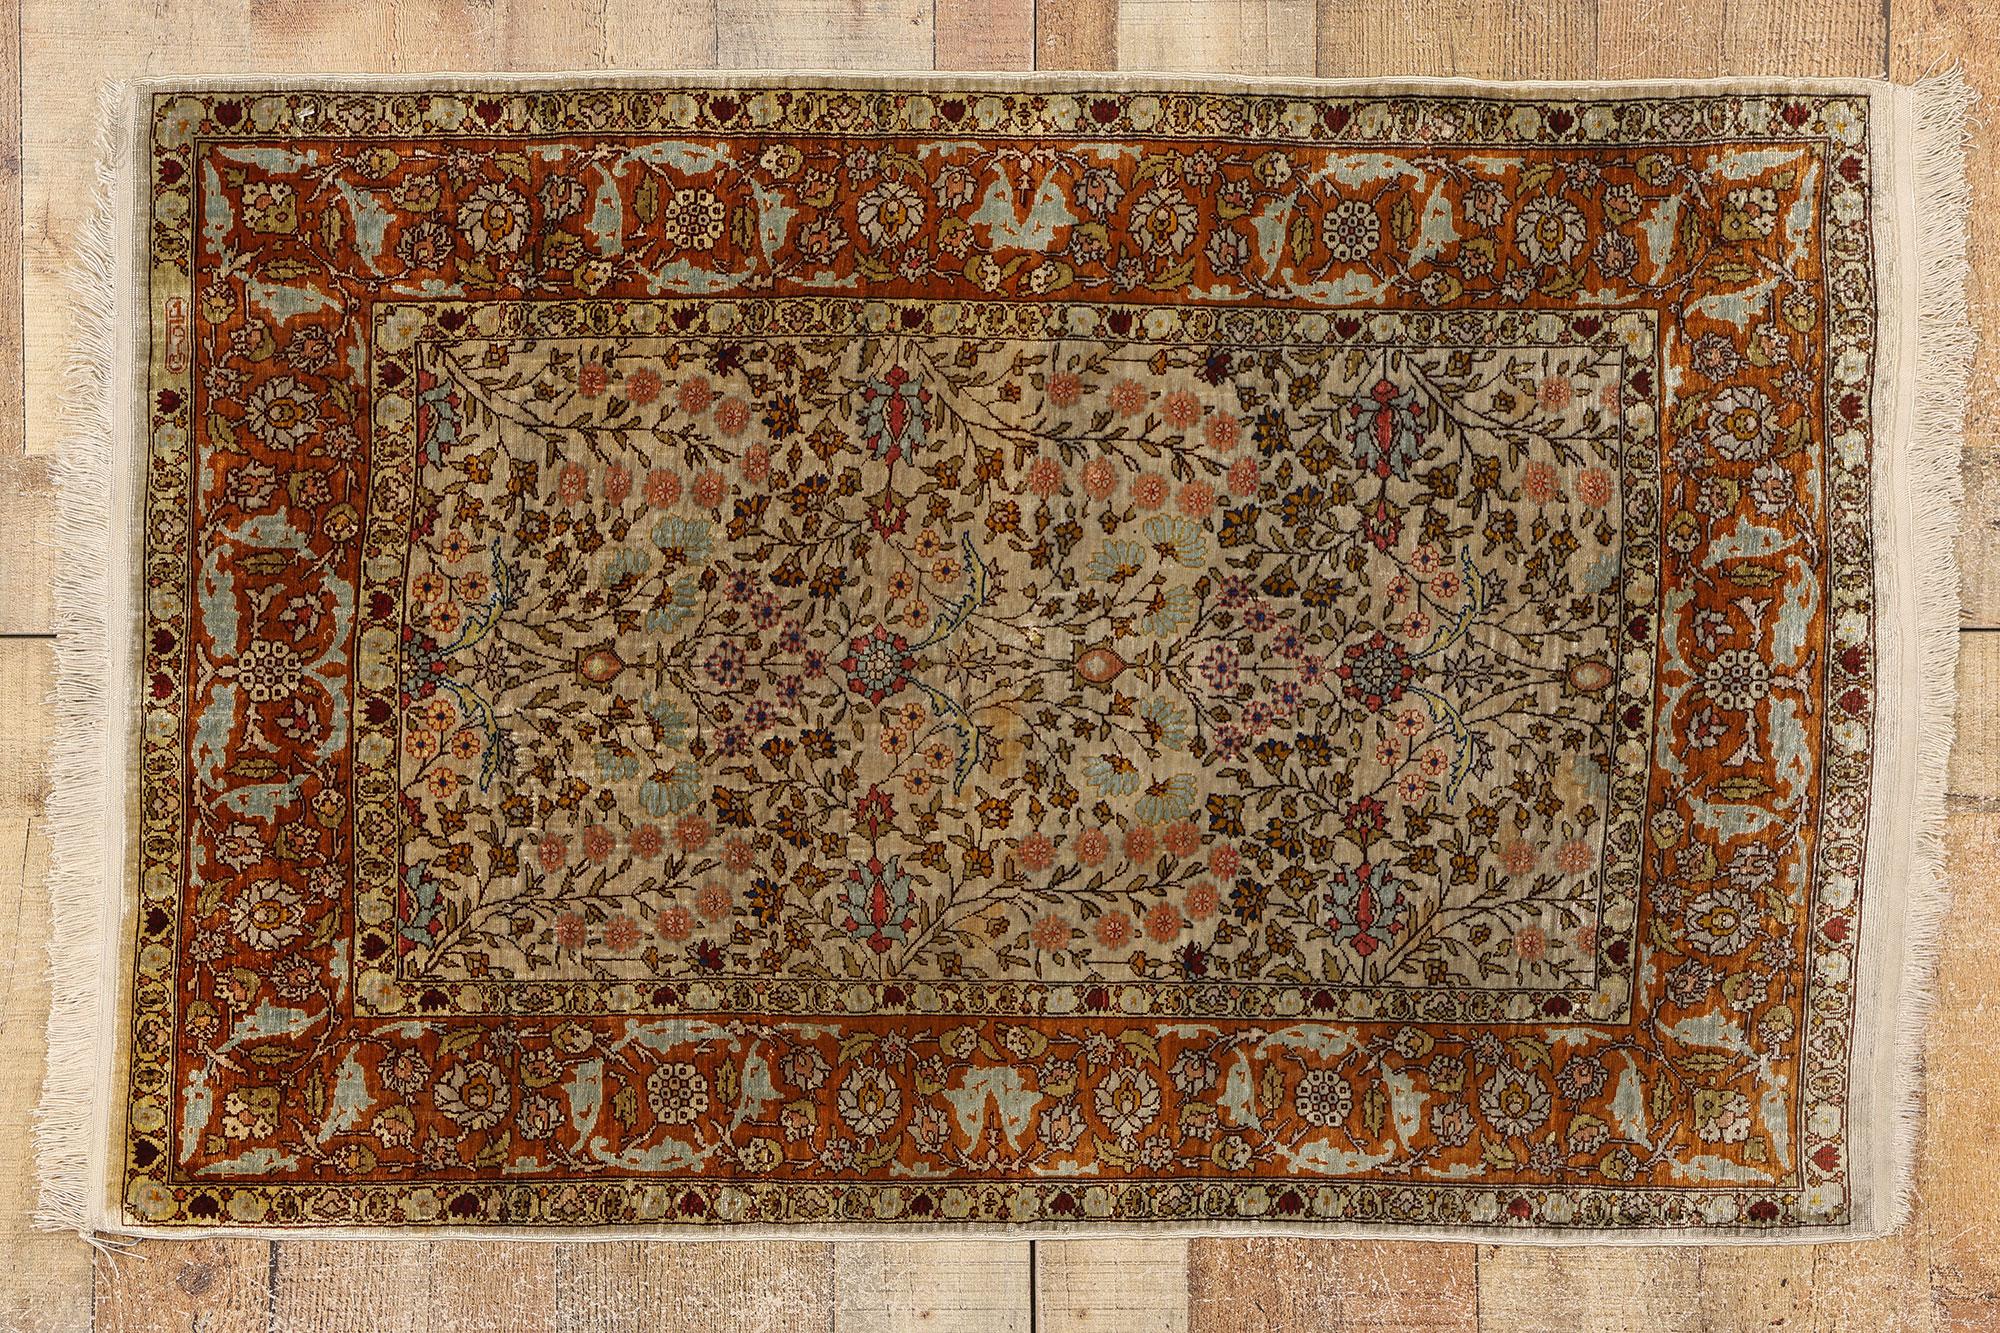 78733 Vintage Turkish Silk Hereke Rug, 02'02 x 03'04. The Hereke rug, born in the Turkish town of Hereke near Istanbul, epitomizes a legacy of exquisite craftsmanship and tradition. These masterpieces, steeped in opulence and skill, are renowned for